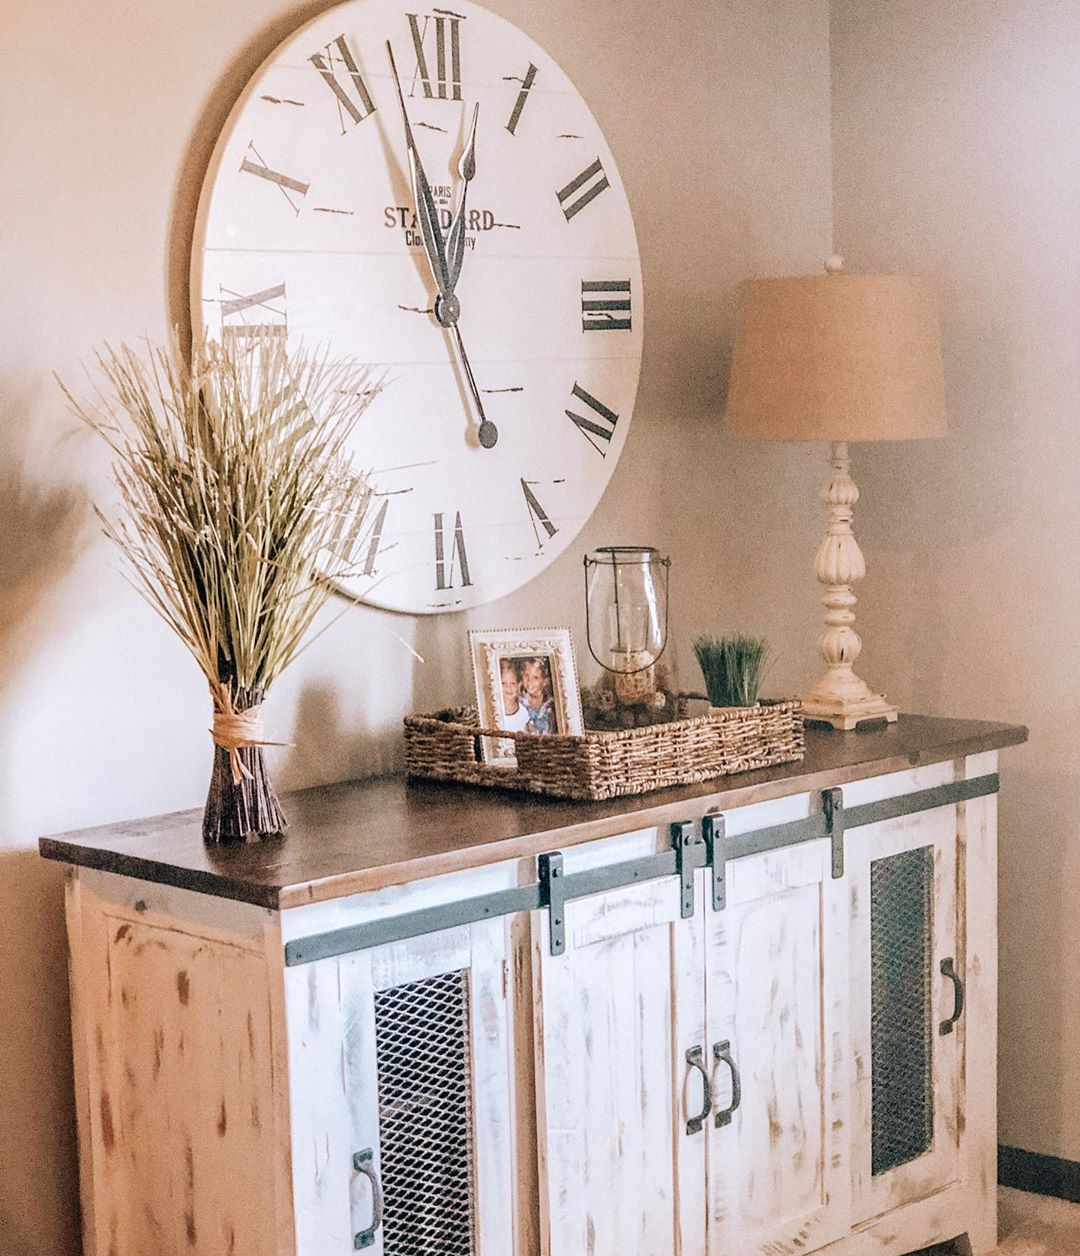 Sideboard with sliding farm doors installed to hide items. Photo by Instagram user @myfarmhouseheritage